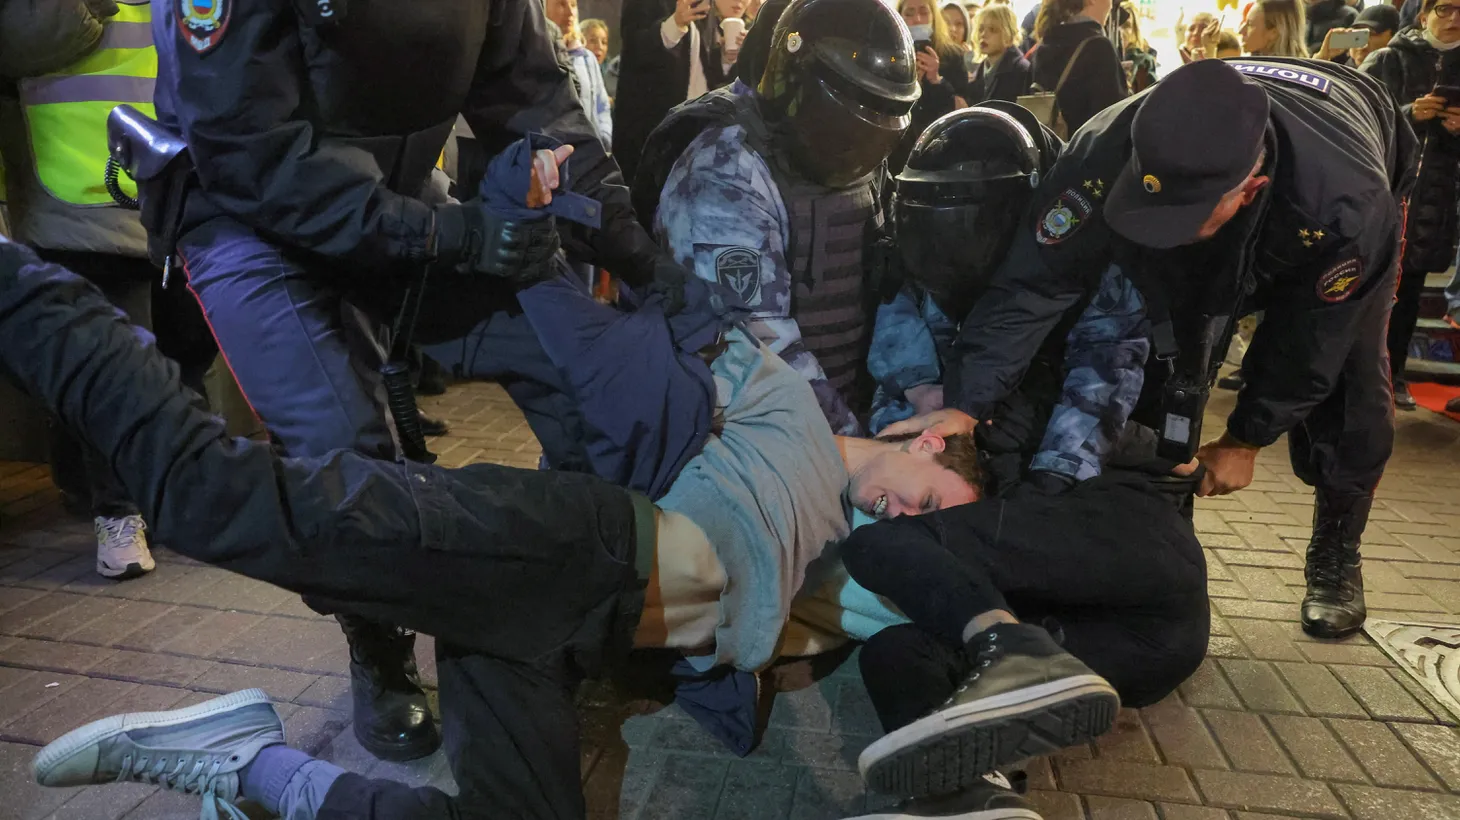 Russian law enforcement officers detain men at a street protest against President Vladimir Putin’s call for the mobilization of reservists, in Moscow, Russia, September 21, 2022.